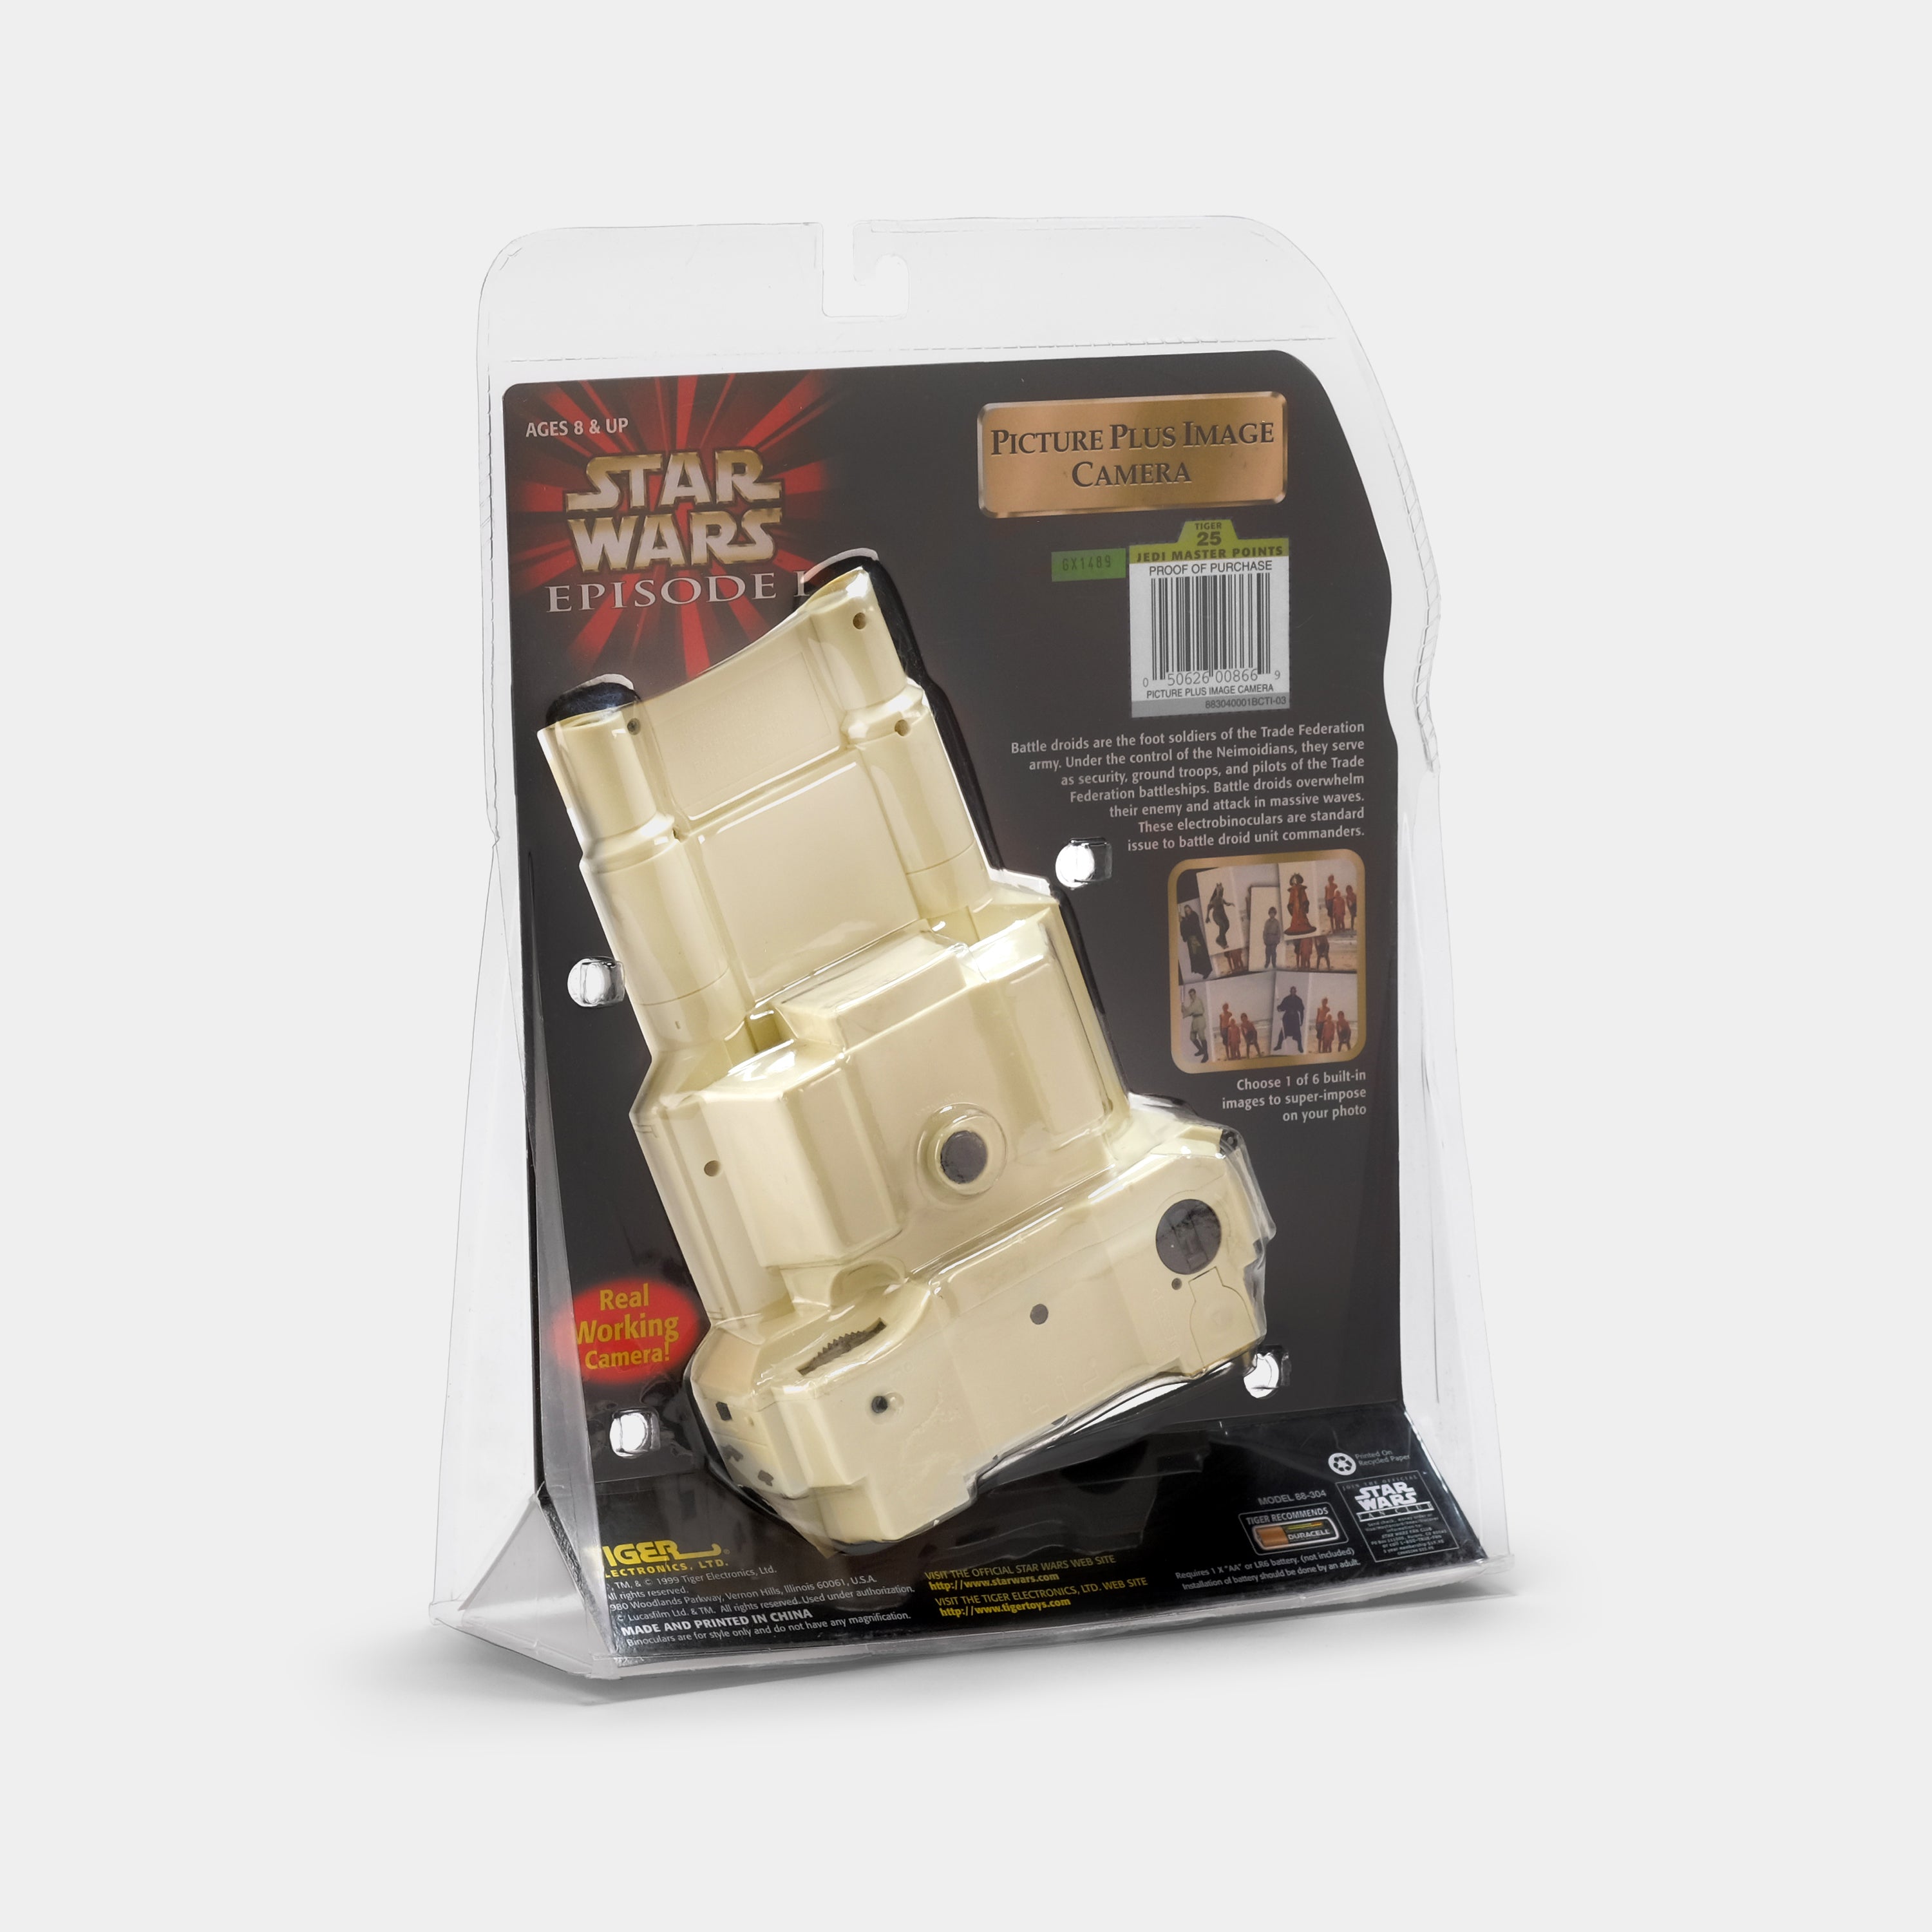 Star Wars: Episode I Picture Plus Image 35mm Point and Shoot Film Camera (New In Packaging)